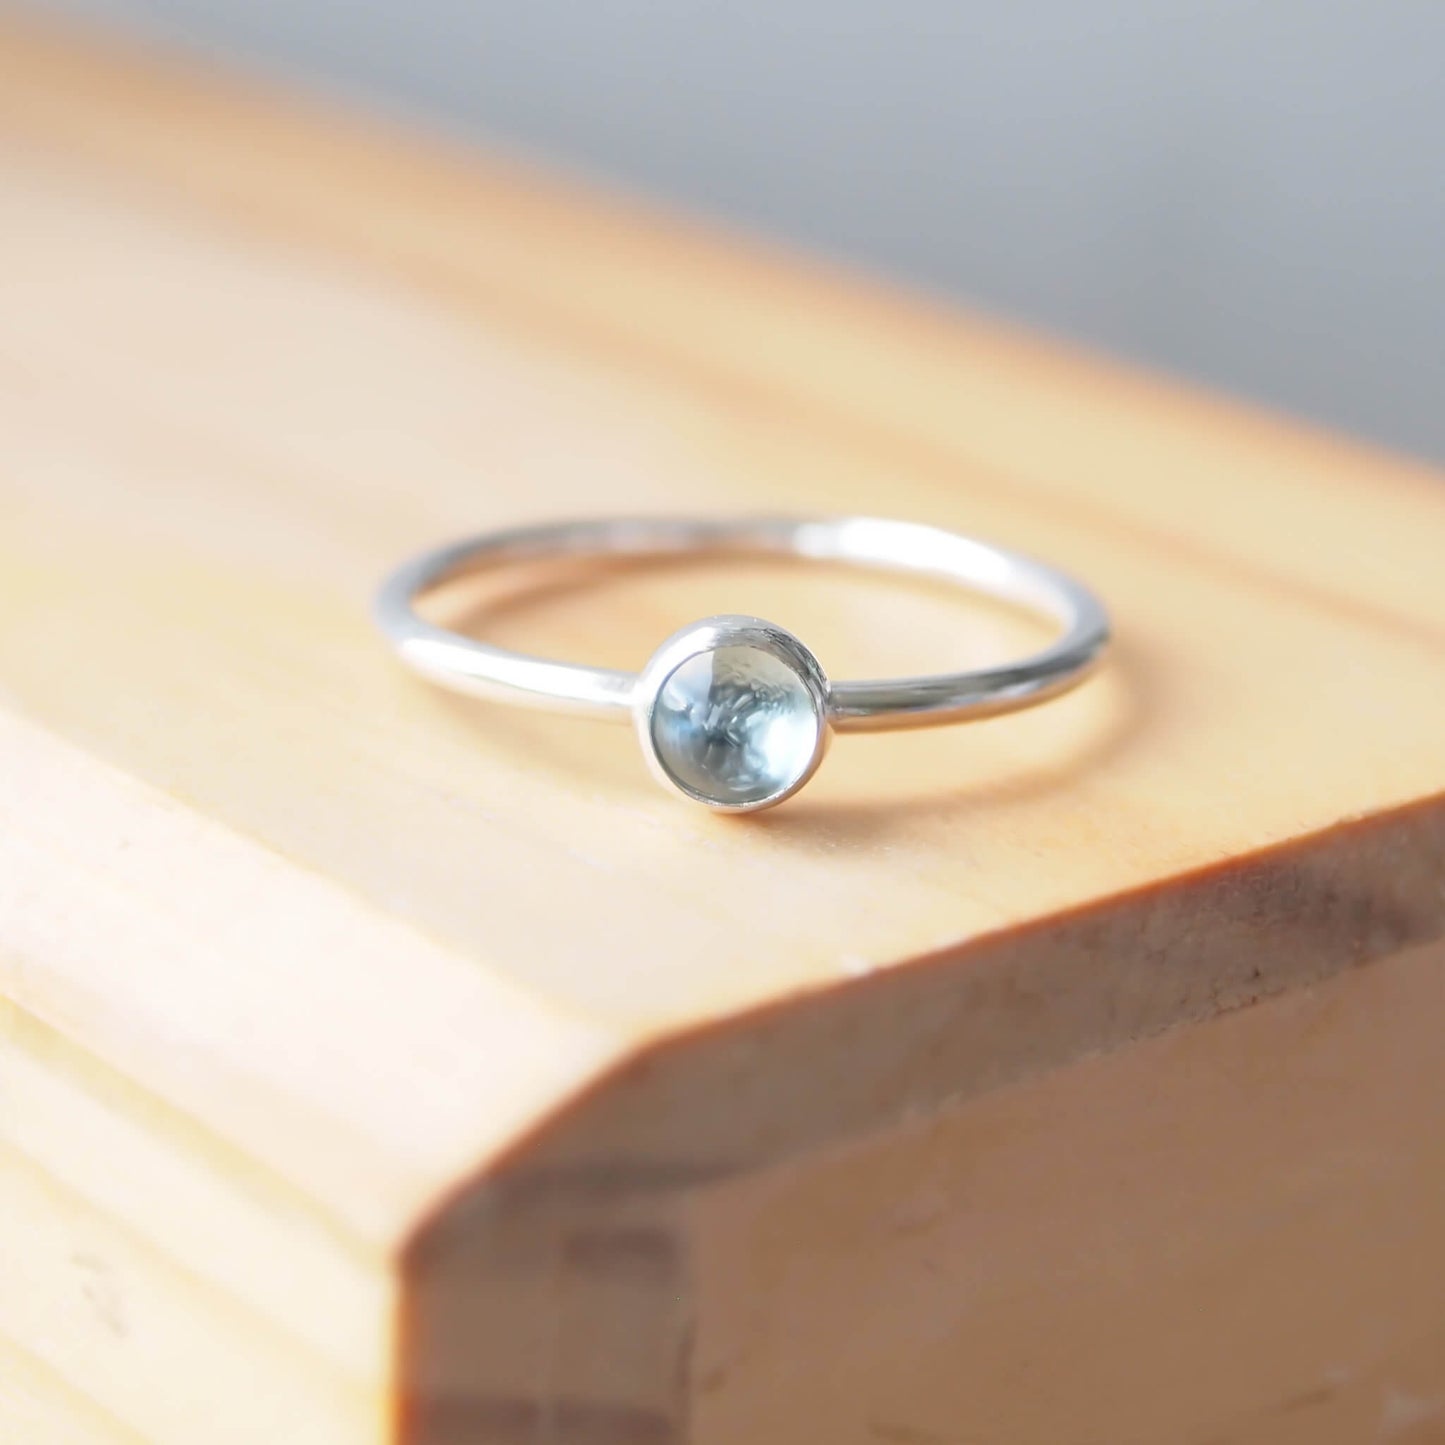 Aquamarine and Sterling Silver solitaire gemstone ring with a round 5mm clear aquamarine set very simply on a round silver band to create a minimalist style ring. Handmade by maram jewellery in Scotland